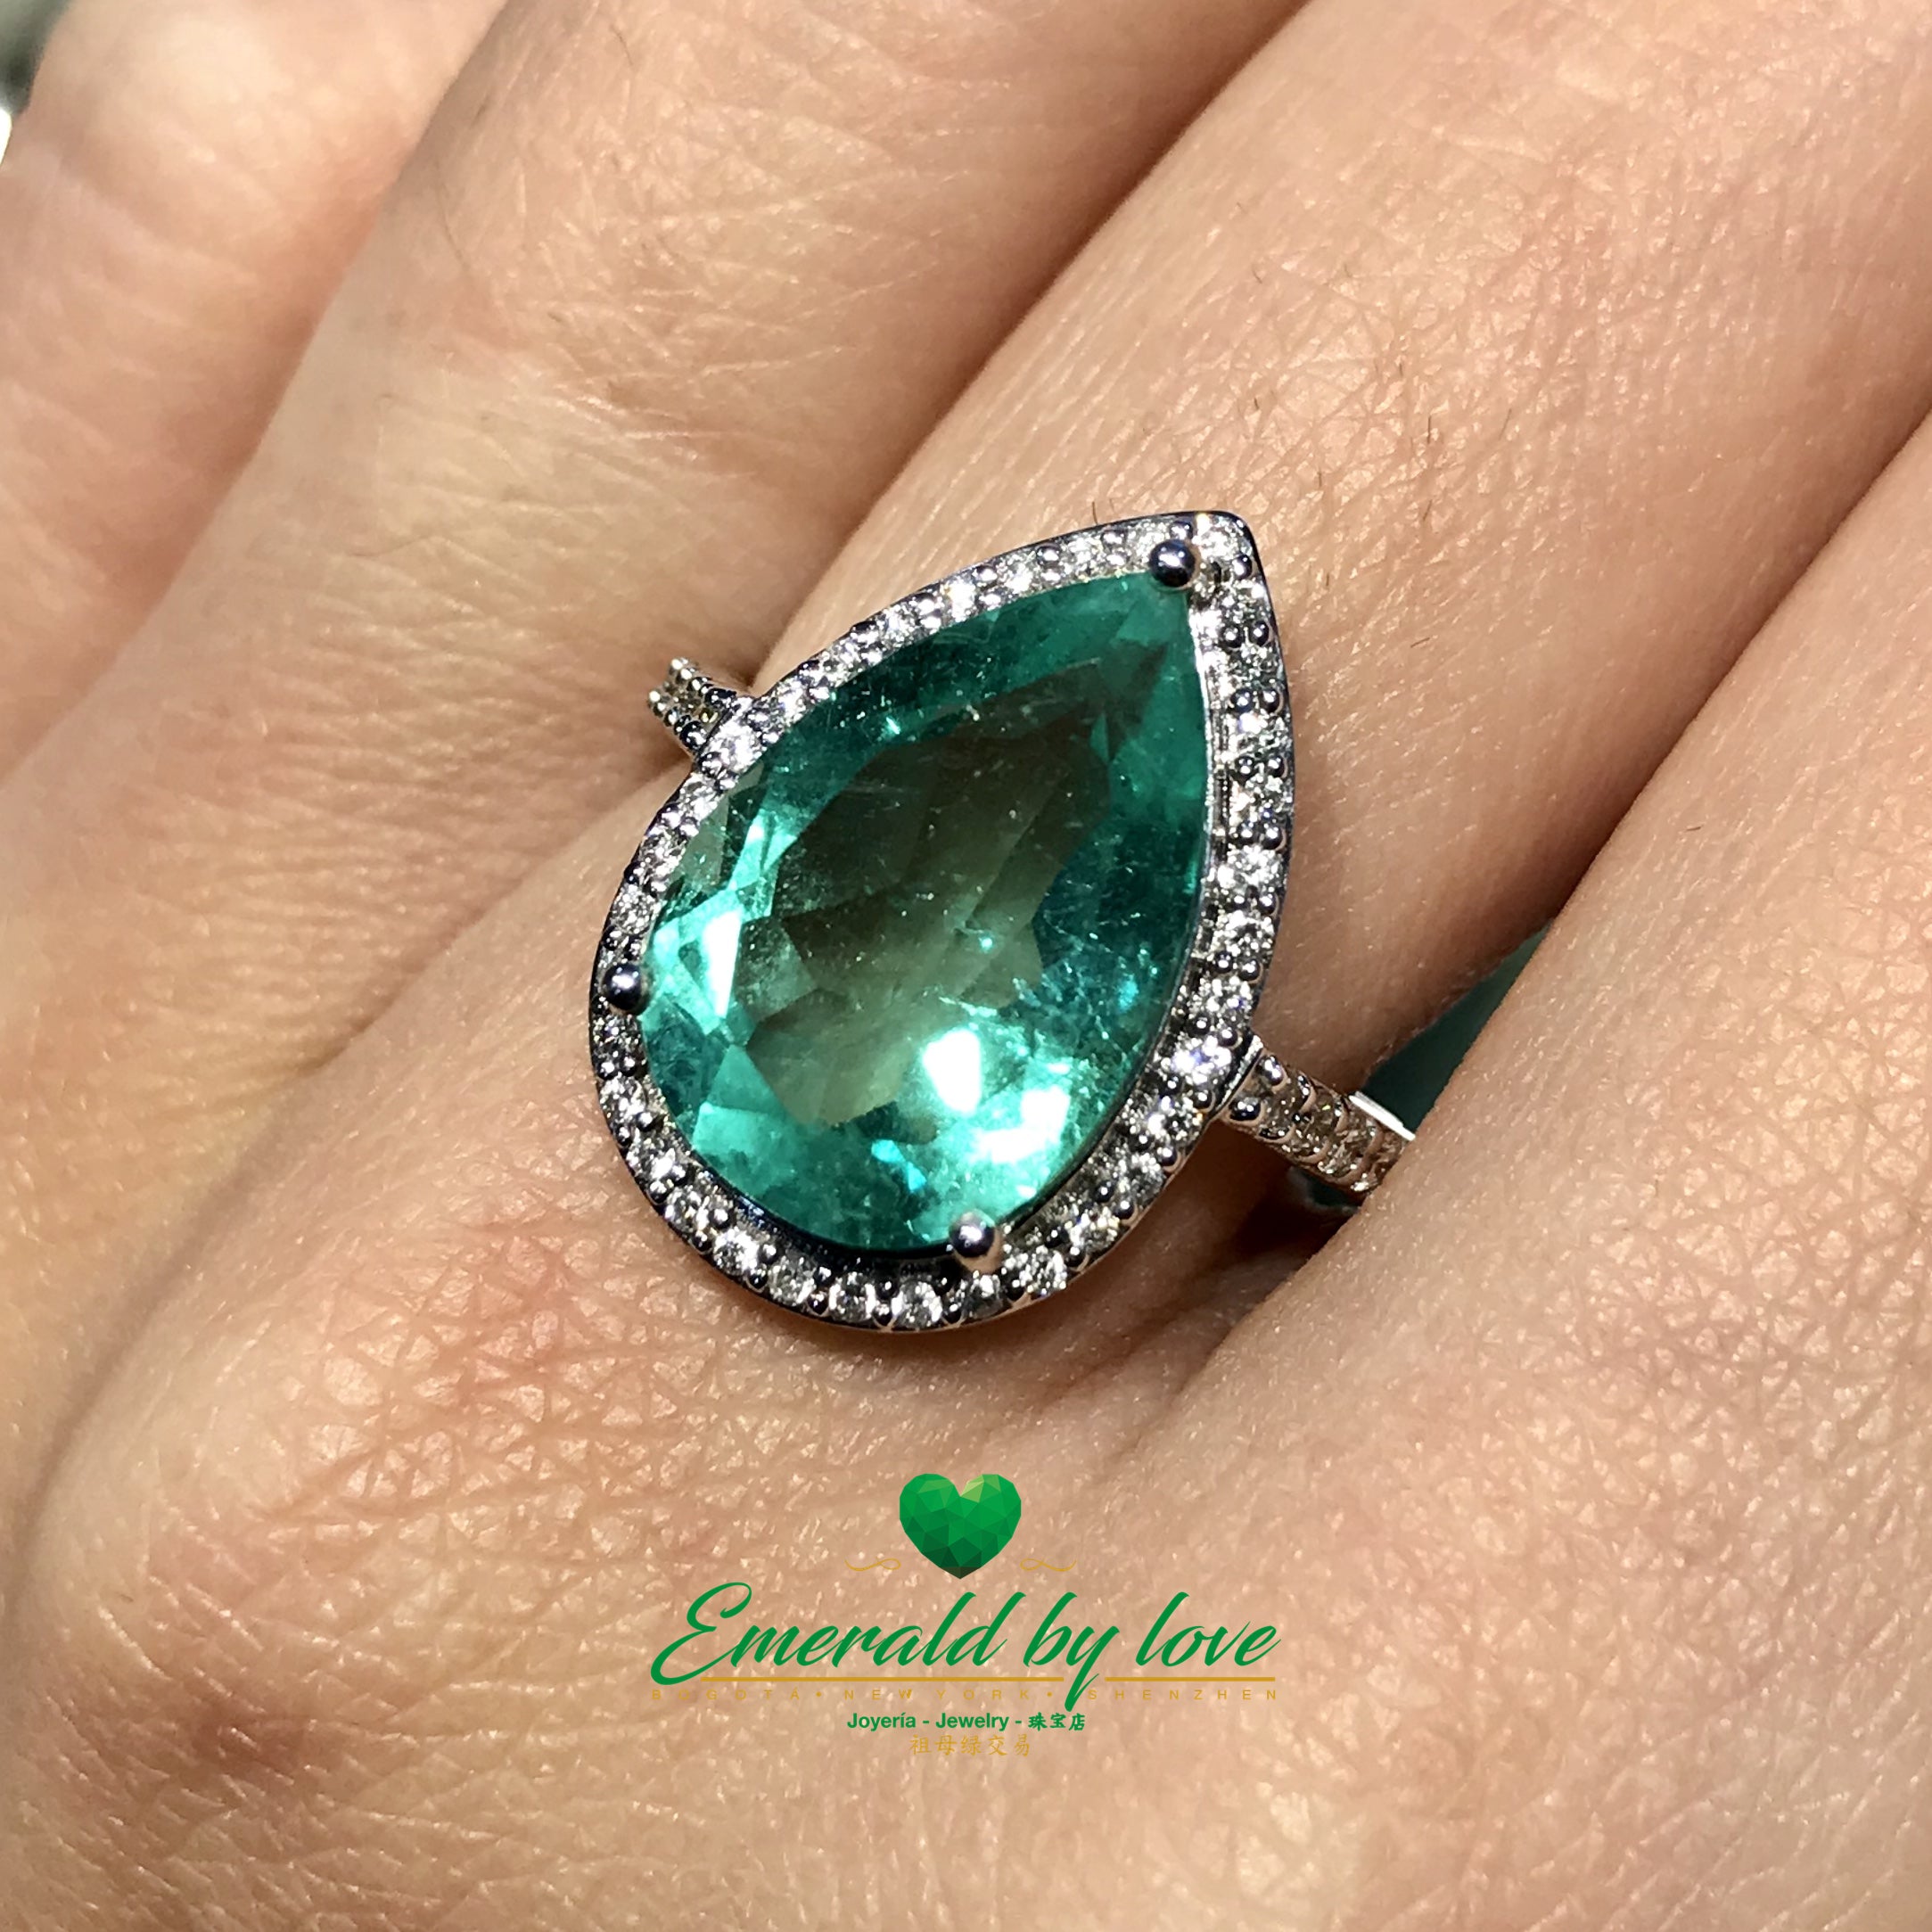 Sparkling Teardrop Halo Colombian Emerald Ring in 18k White Gold